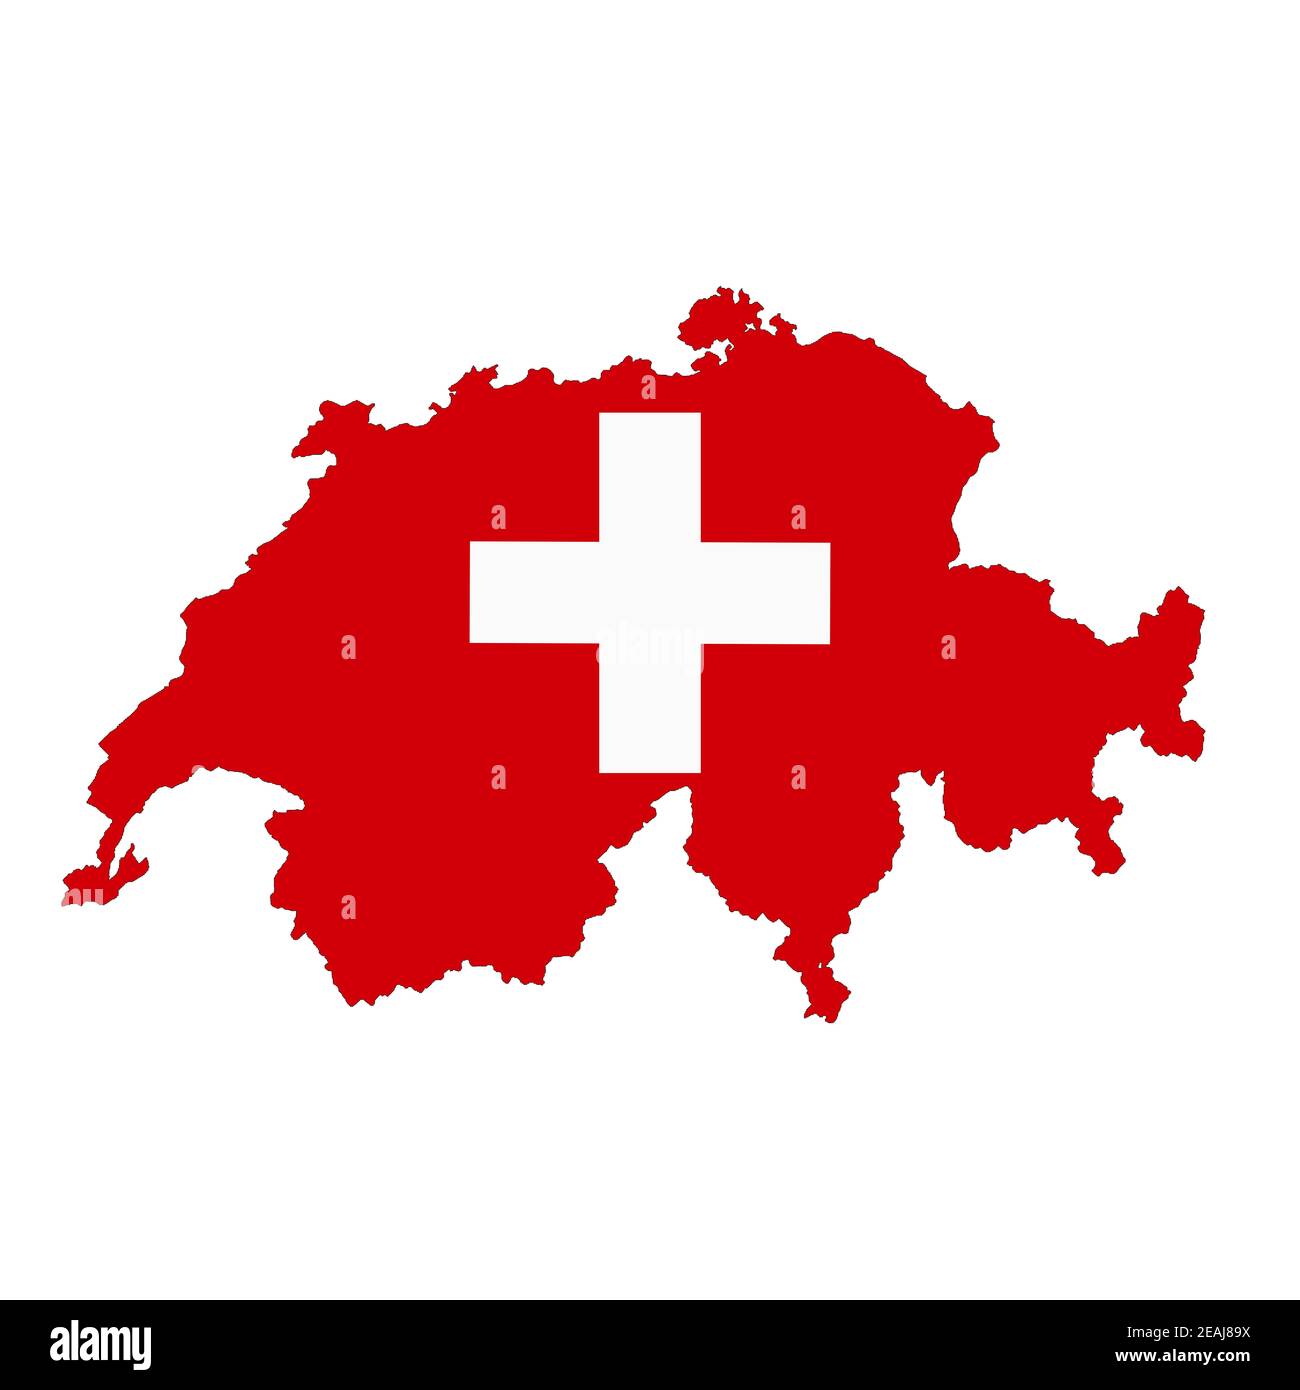 Switzerland map on white background with clipping path Stock Photo